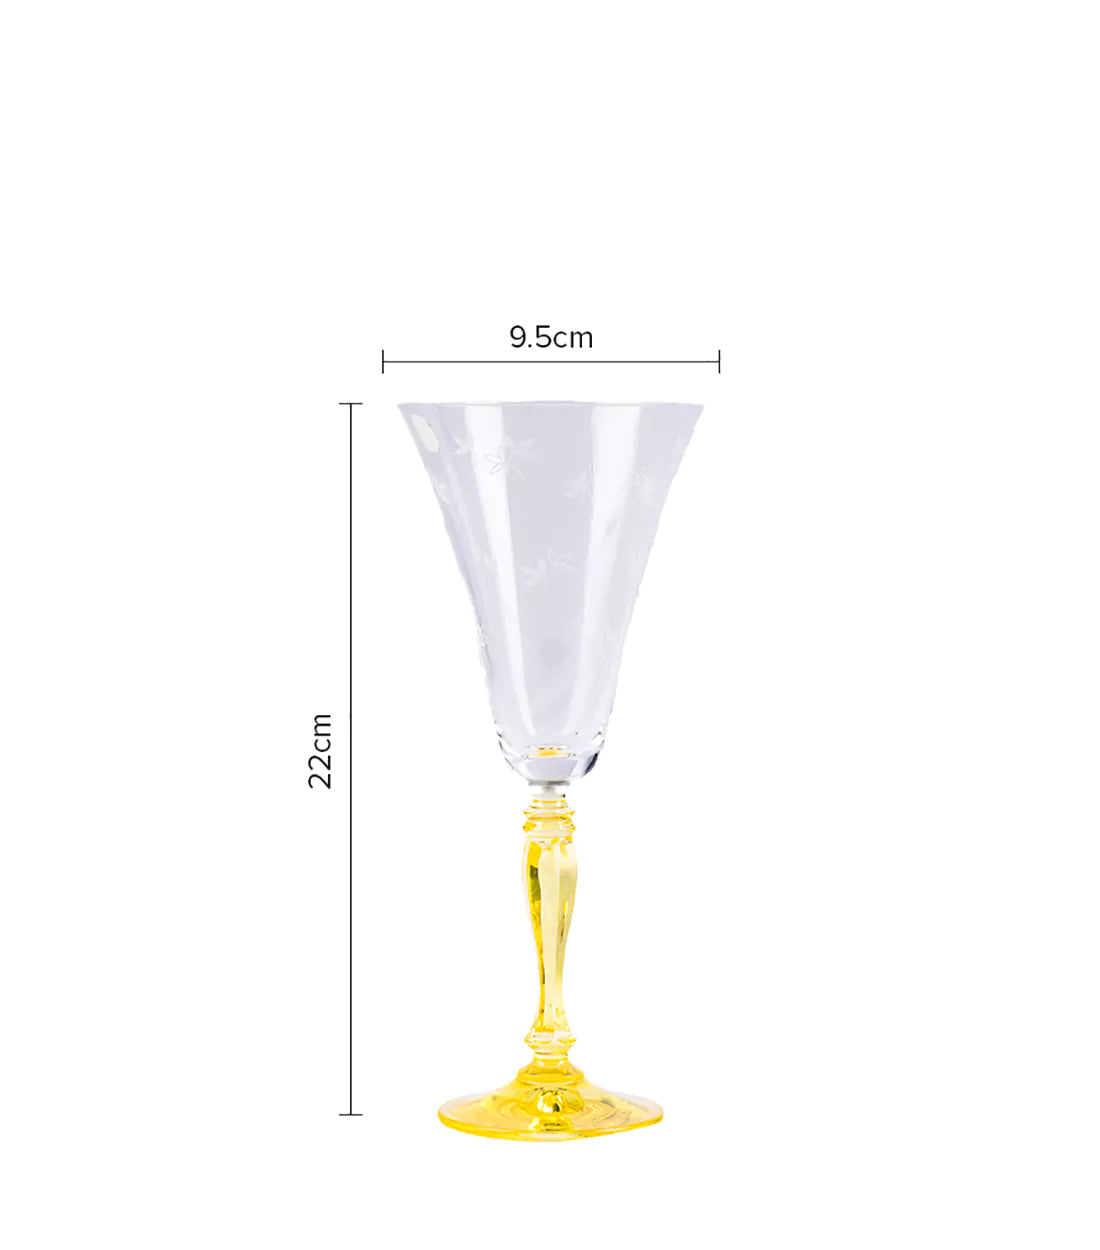 CAESAR CRYSTAL BOHEMIAE - Bell Shaped Crystal Cut Glass in Yellow Color - Bespoke Cocktail Yellow Flute Glass with Fine Detailing.